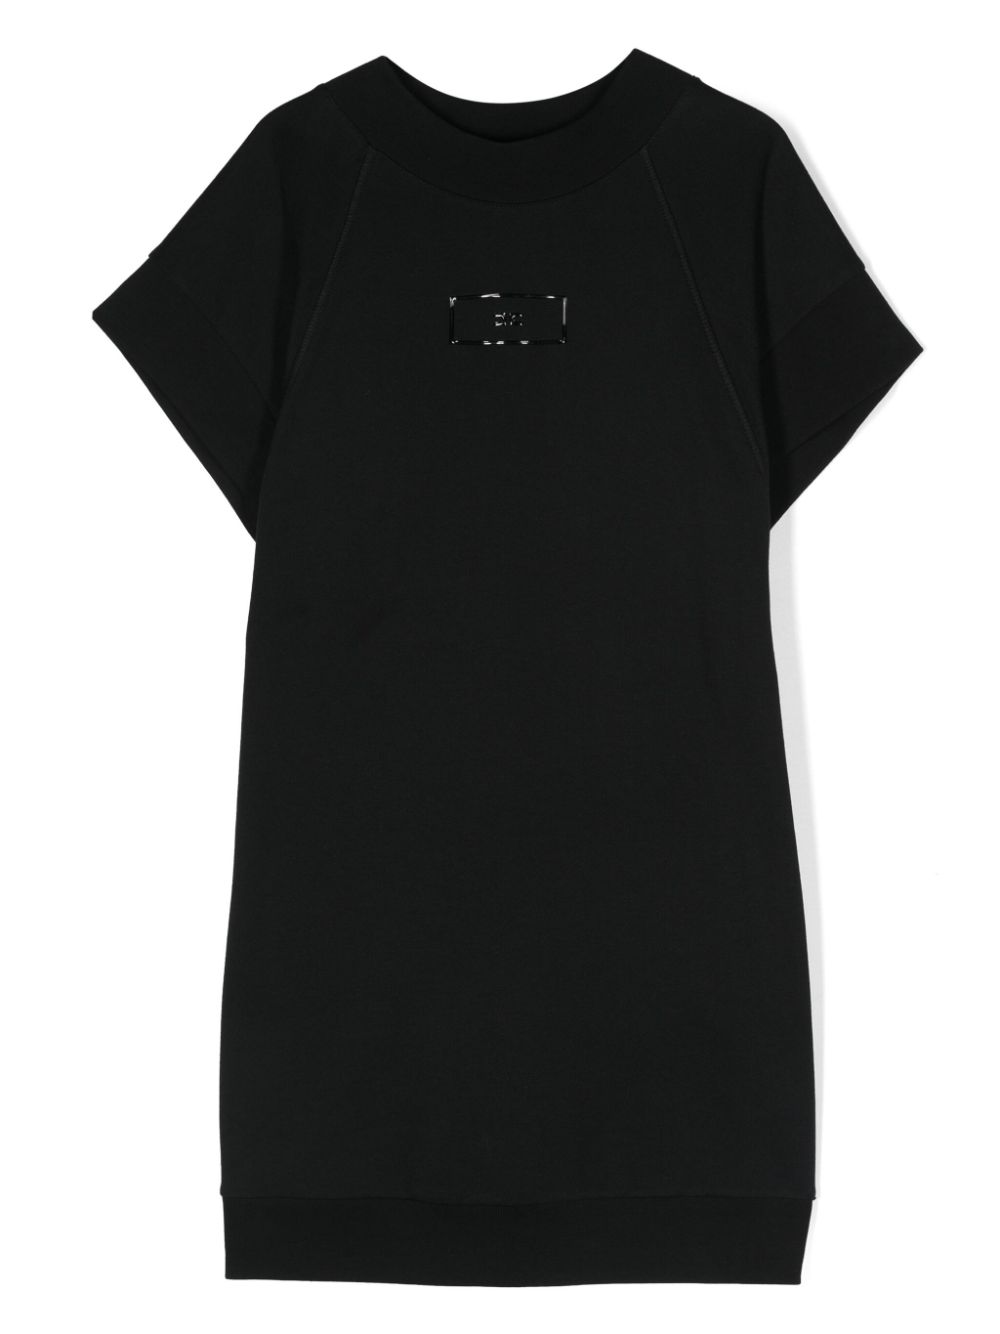 Black dress for girls with logo